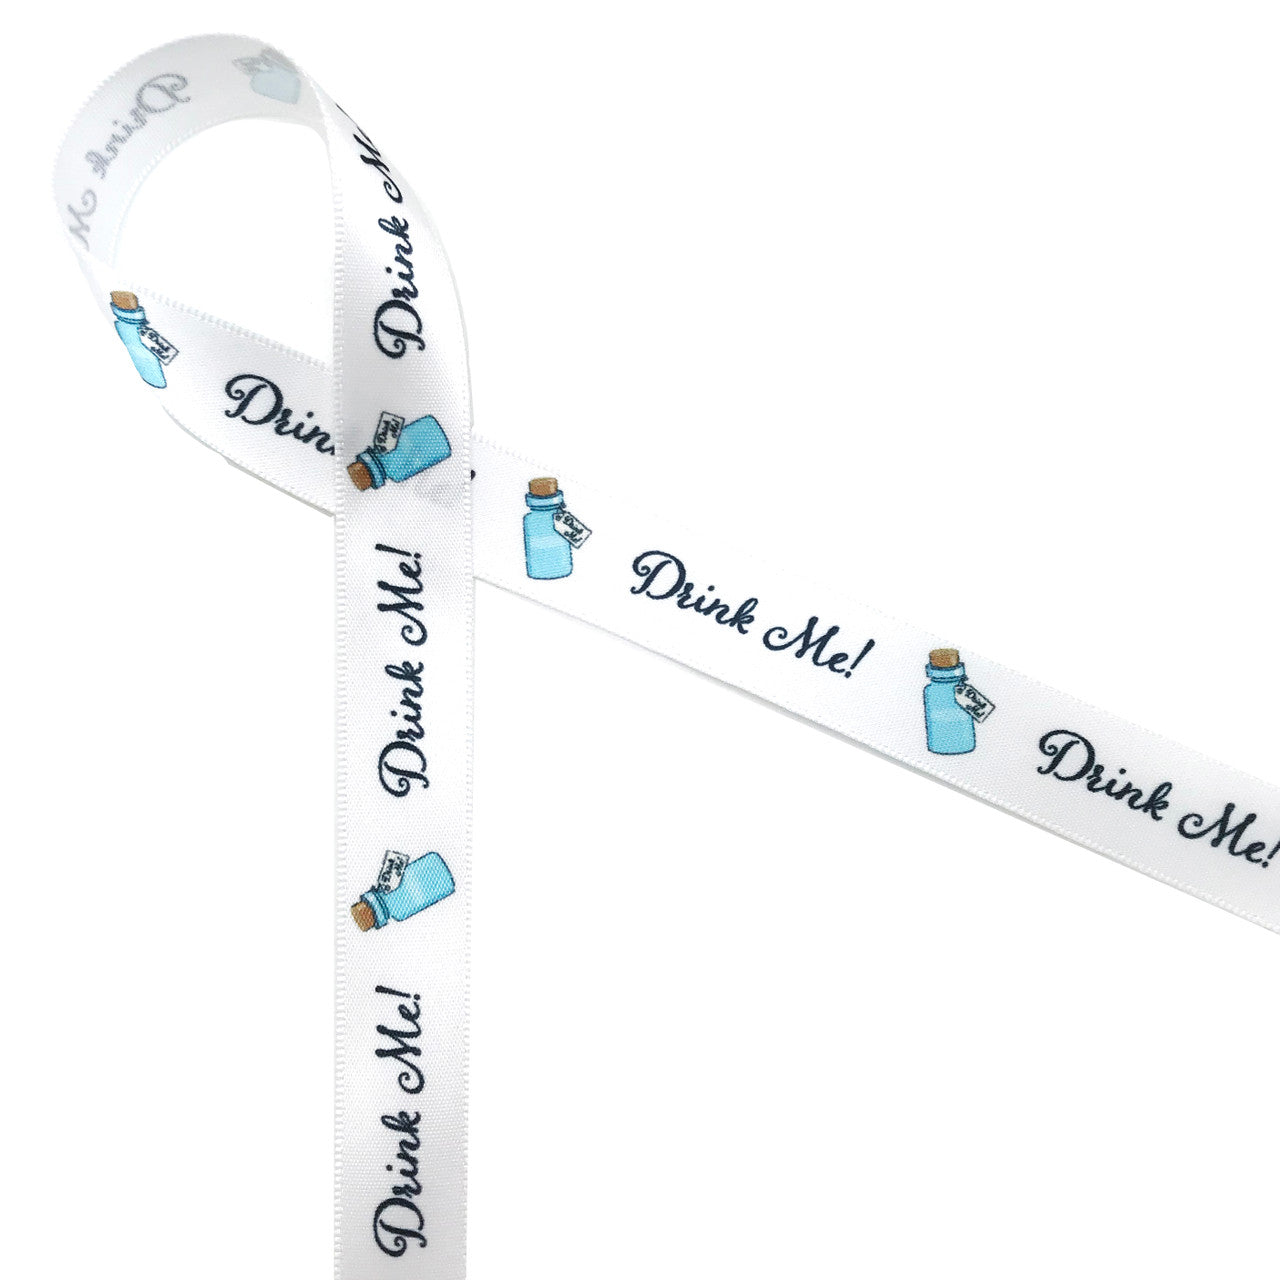 Alice in Wonderland iconic blue "Drink Me" bottle with black text printed on 5/8" white single face satin ribbon is ideal for Alice themed parties, showers, tea parties, events, and theater productions. This is the perfect ribbon for favors, gifts, gift wrap, swag bags, sweets and treats! Be sure to have this ribbon on hand for all the Alice fans in your life. Our ribbon is designed and printed in the USA